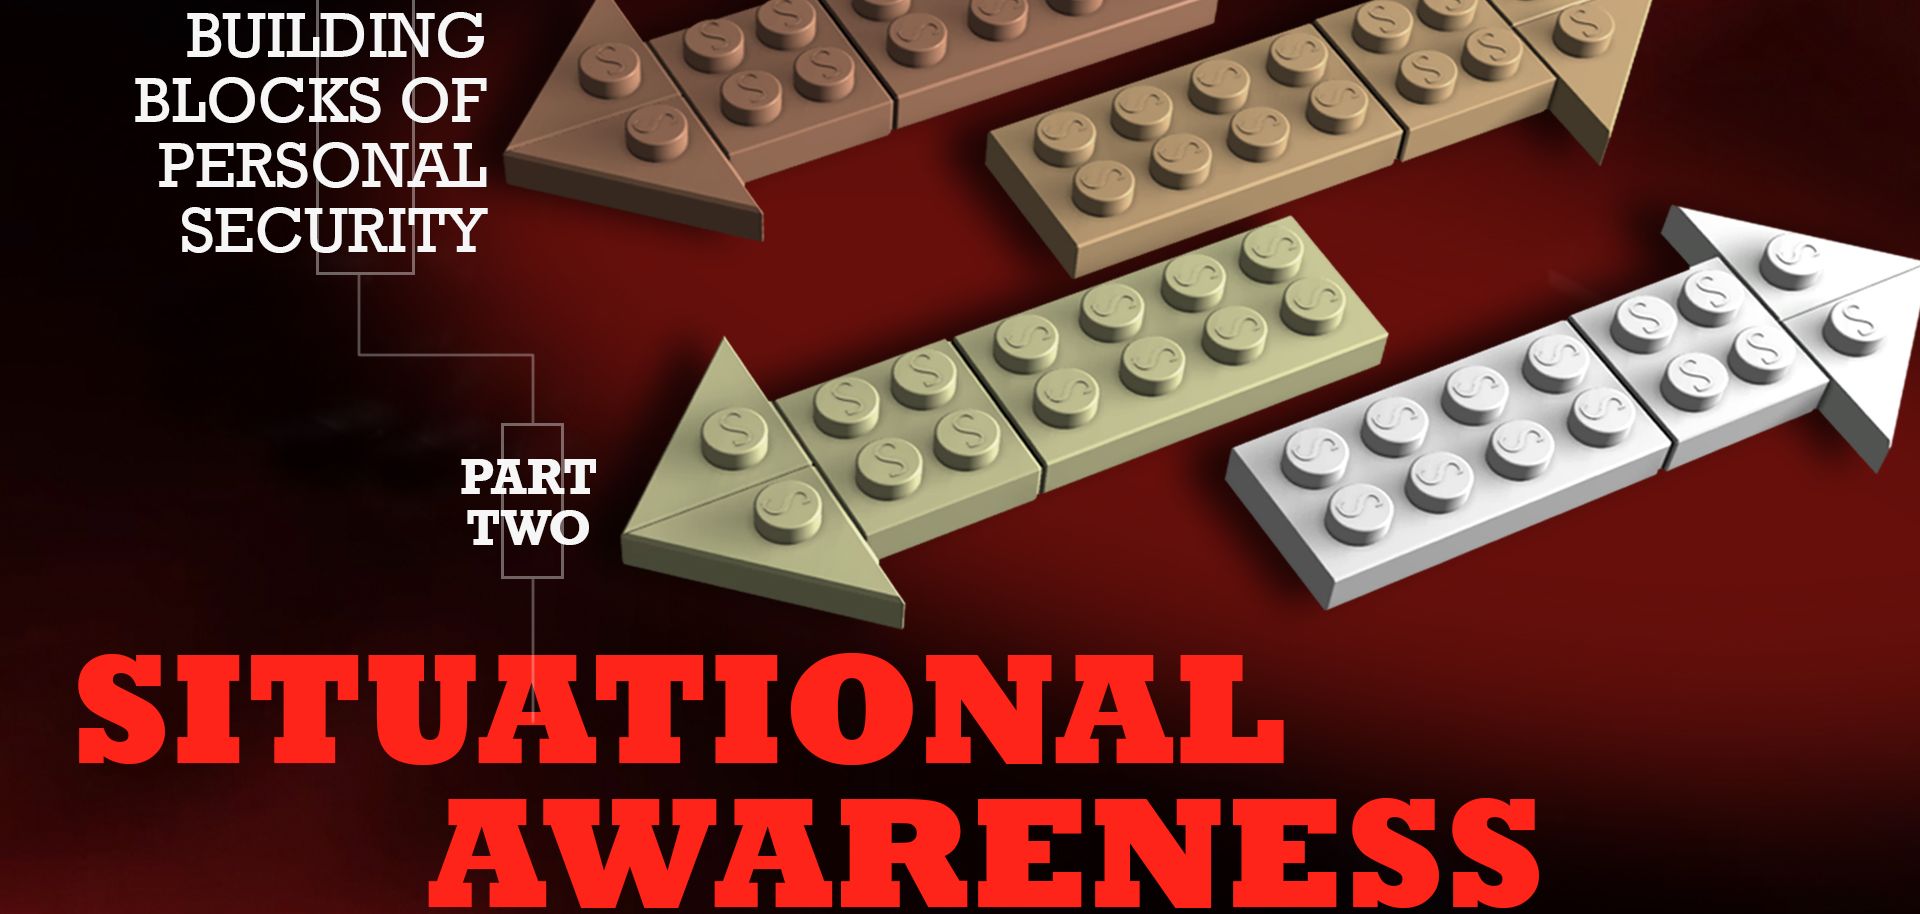 Building Blocks of Personal Security Part Two: Situational Awareness